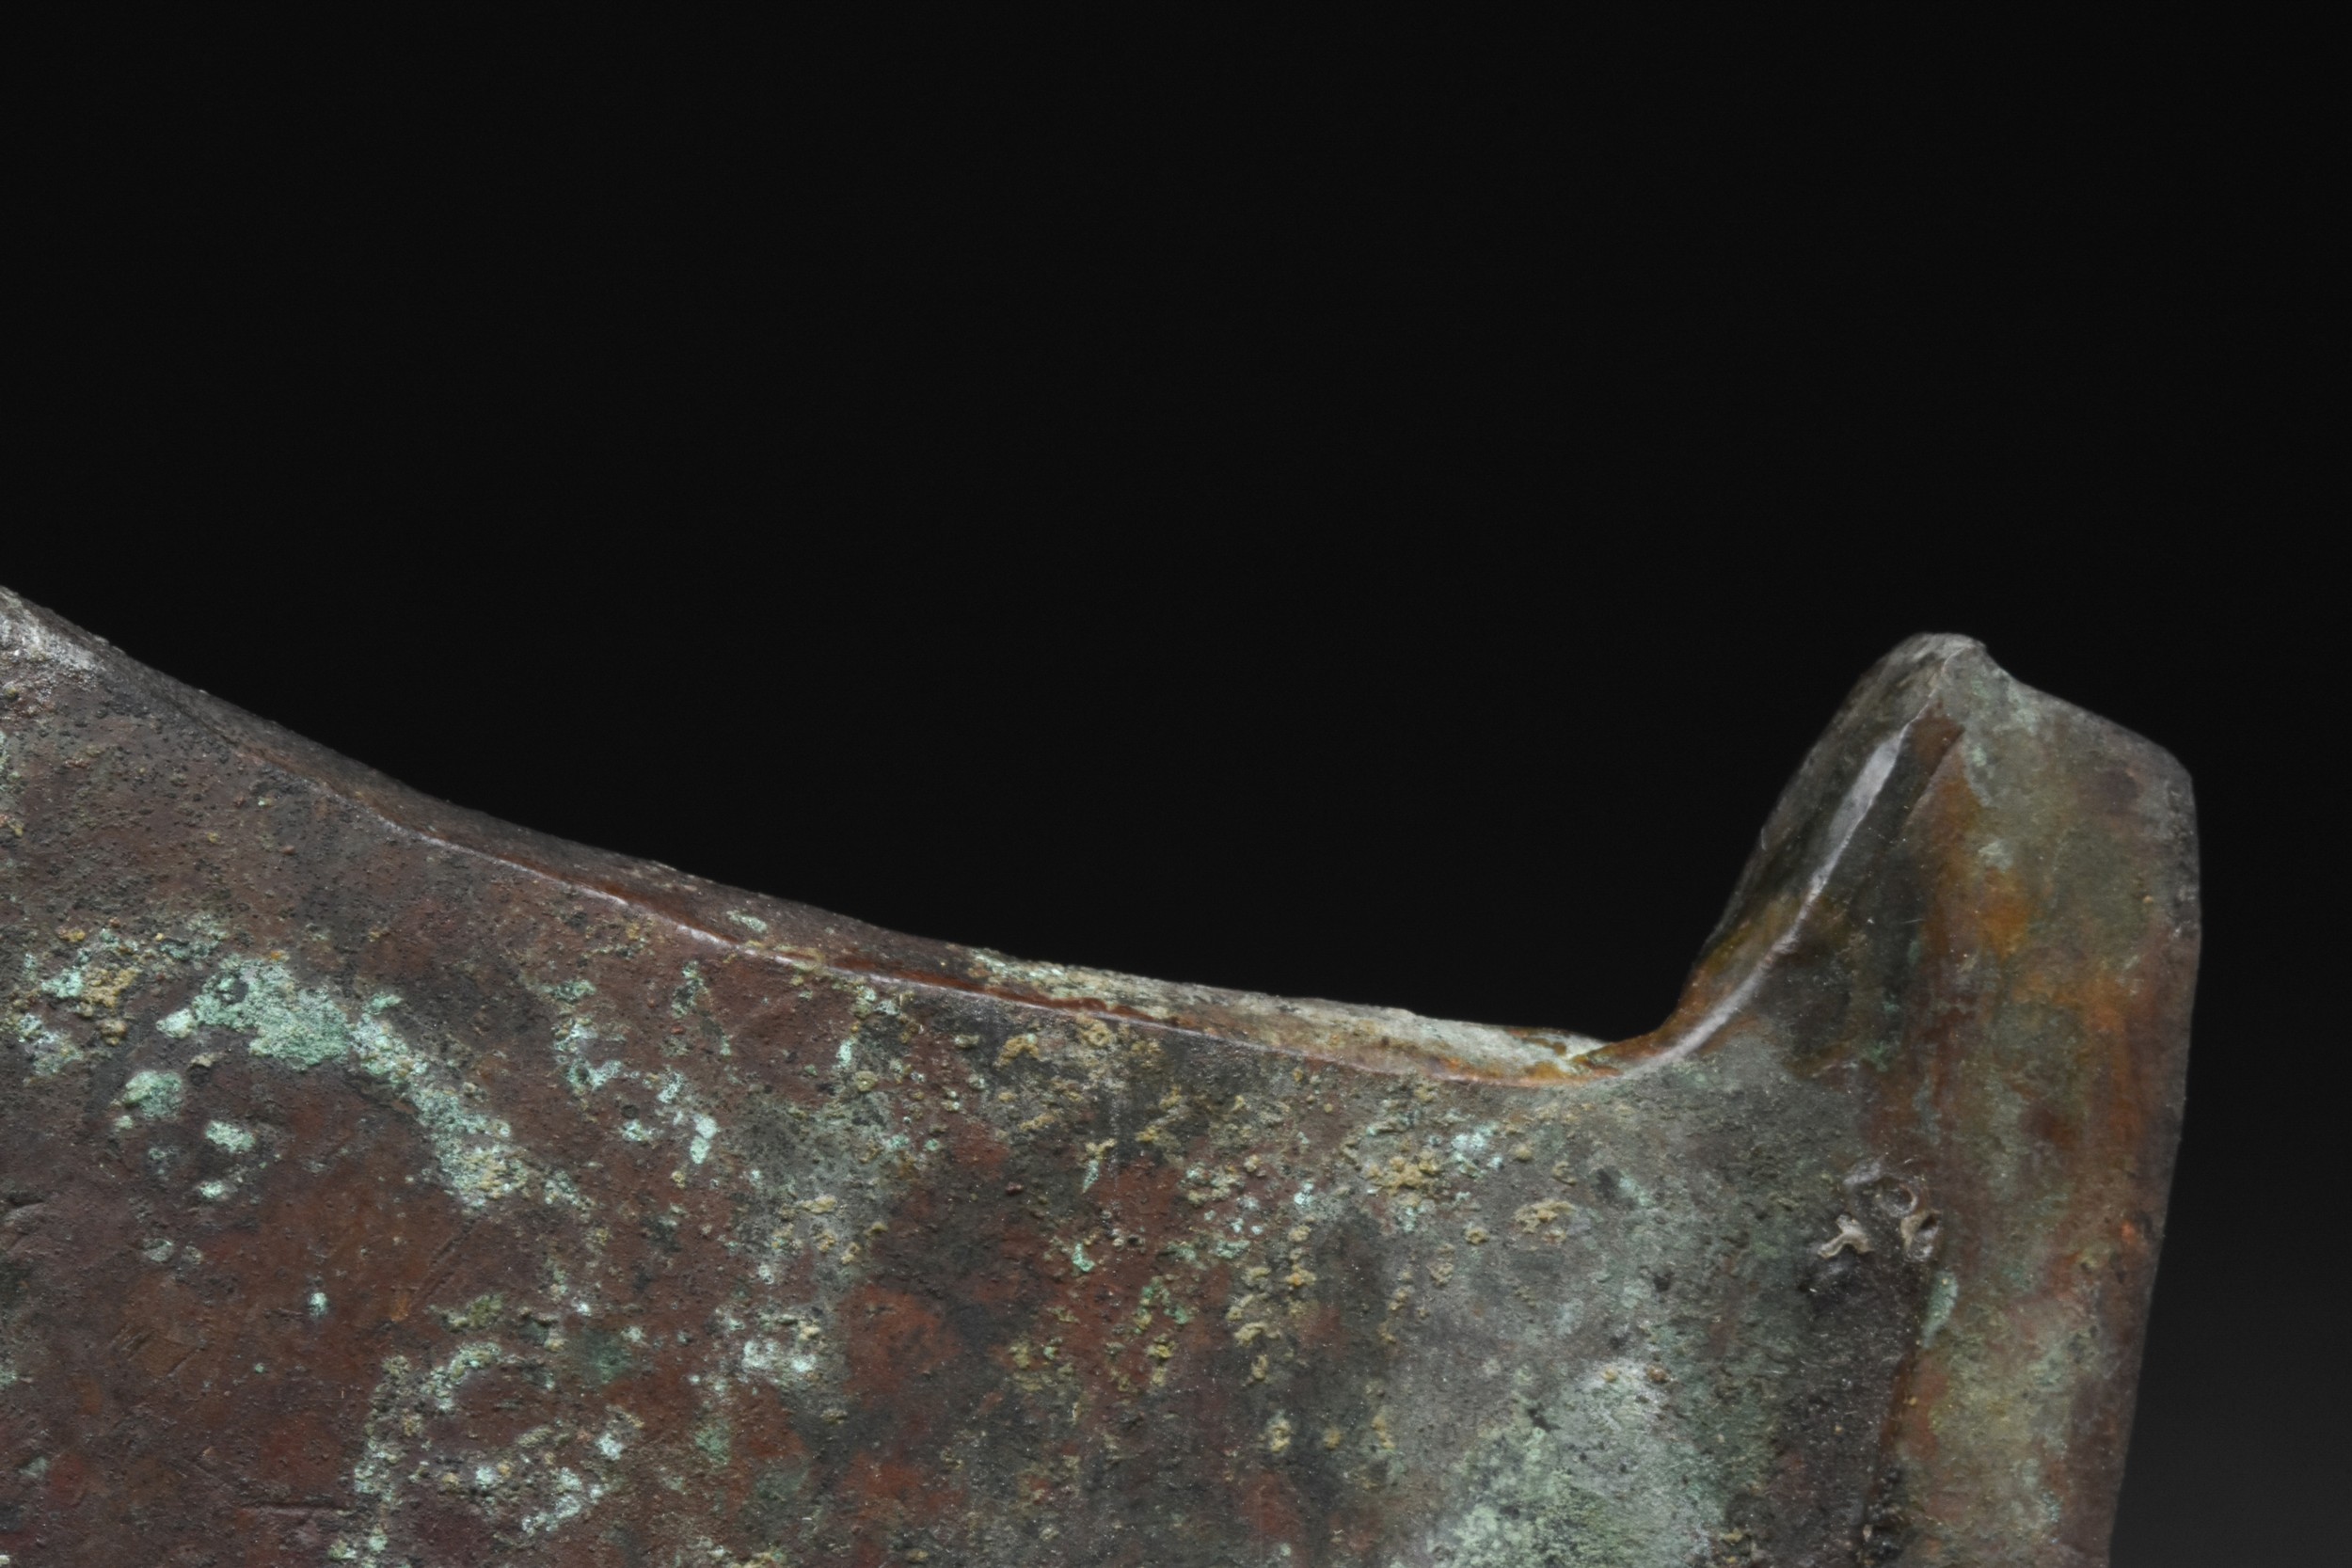 AN EGYPTIAN BRONZE BATTLE AXE - WITH REPORT - Image 5 of 6